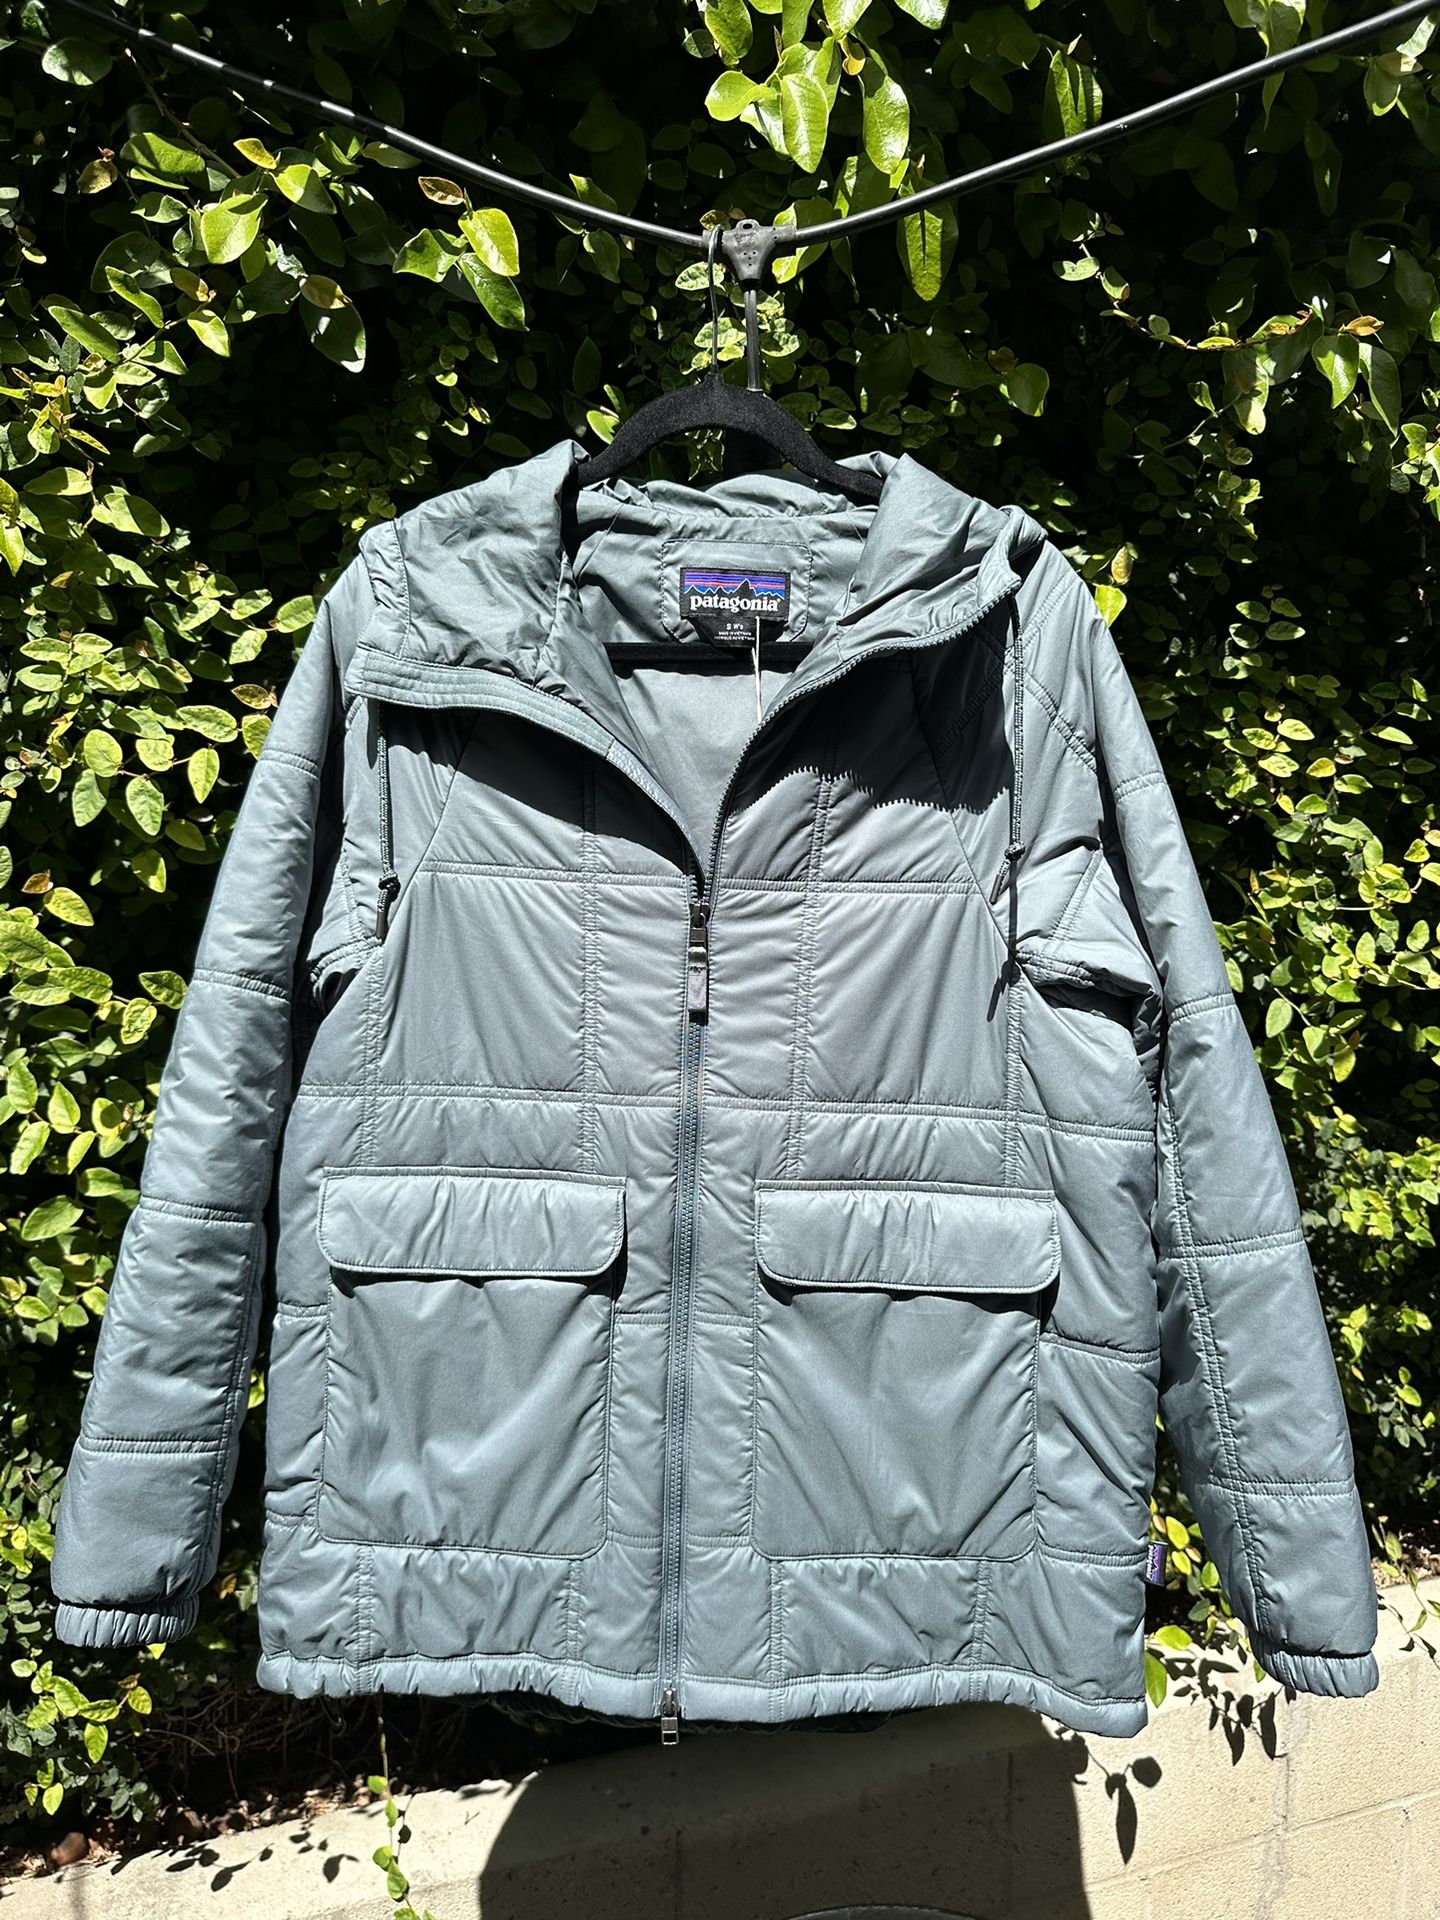 New: Patagonia’s Women’s Lost Canyon Jacket Size M